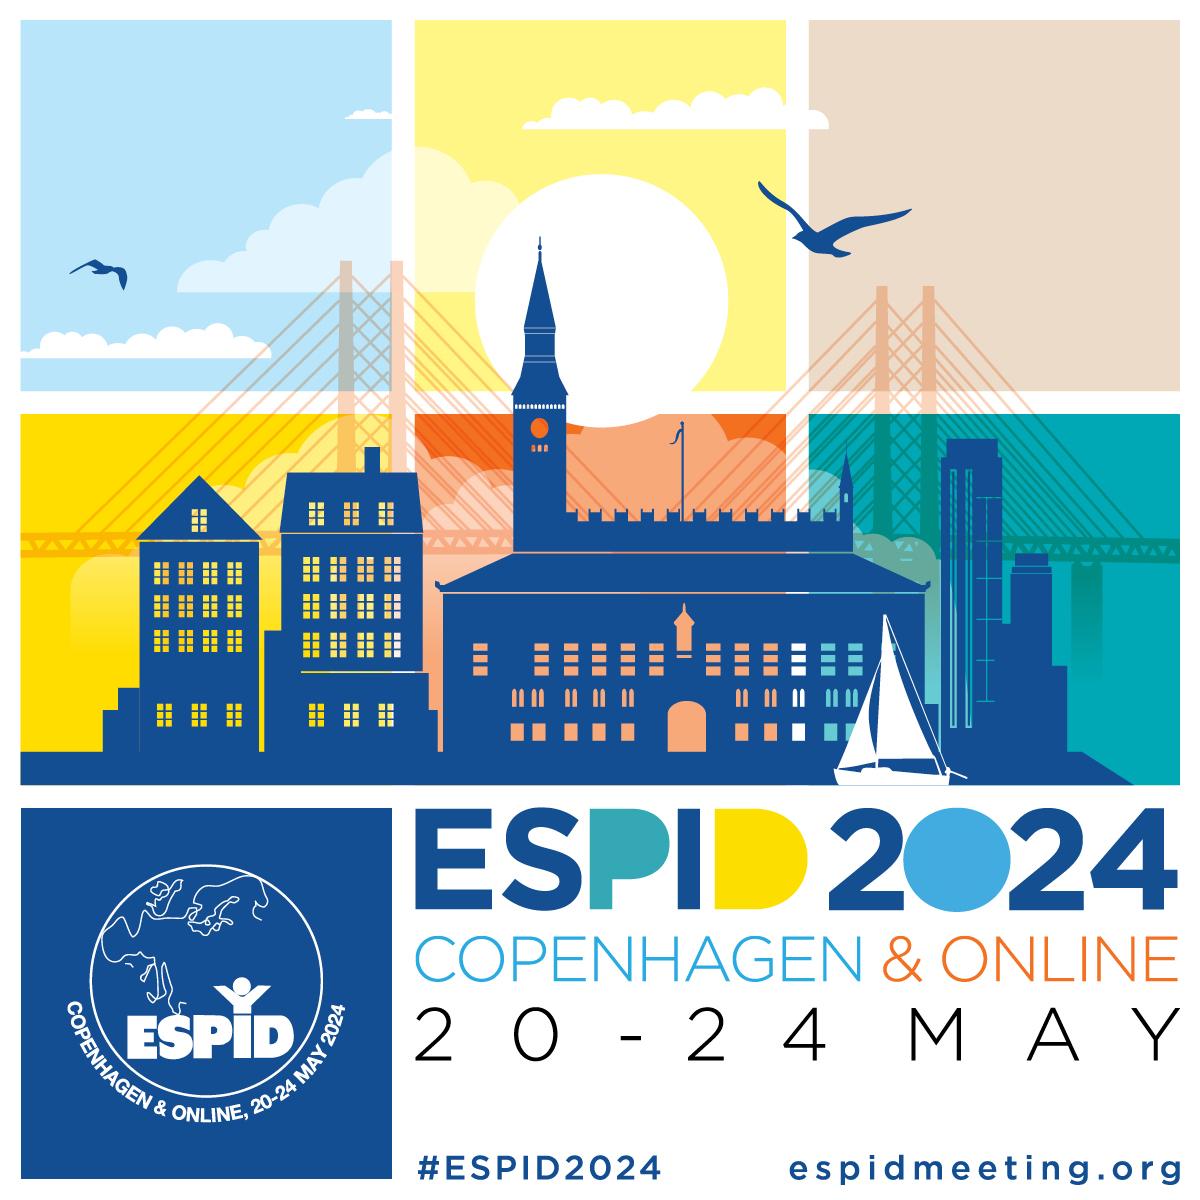 #KenesEvents✨ Greetings to our team delivering excellence onsite at the #ESPID2024 42nd Annual Meeting of the @ESPIDsociety European Society for Paediatric Infectious Diseases - ESPID #Copenhagen #Denmark May 20 - 24, 2024 🎉 Learn more 🔗 espidmeeting.org